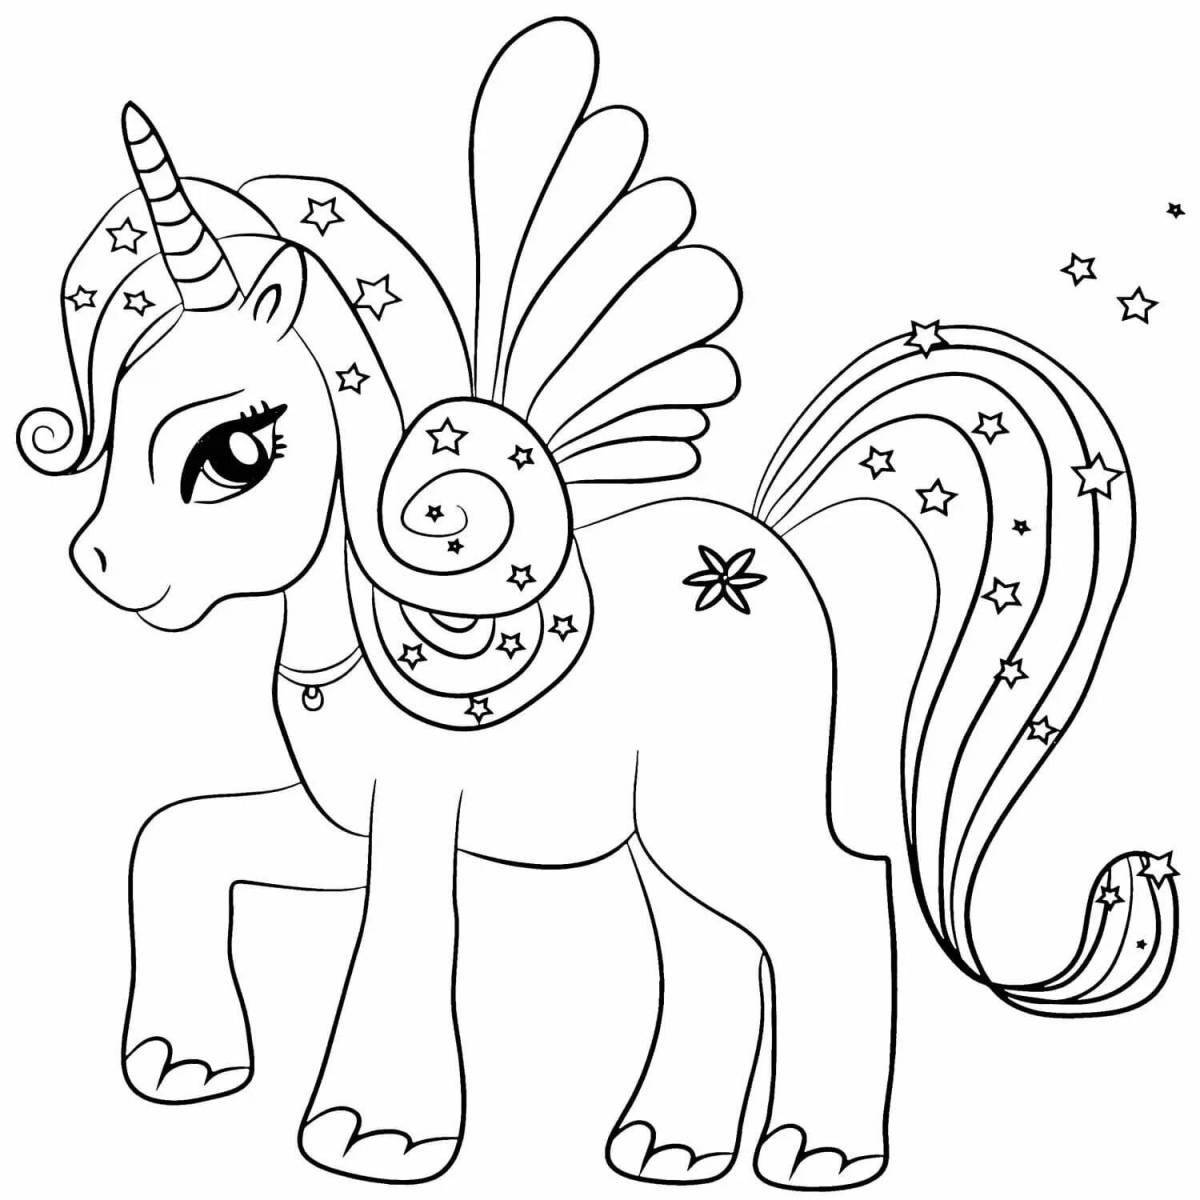 A spectacular unicorn coloring book for kids